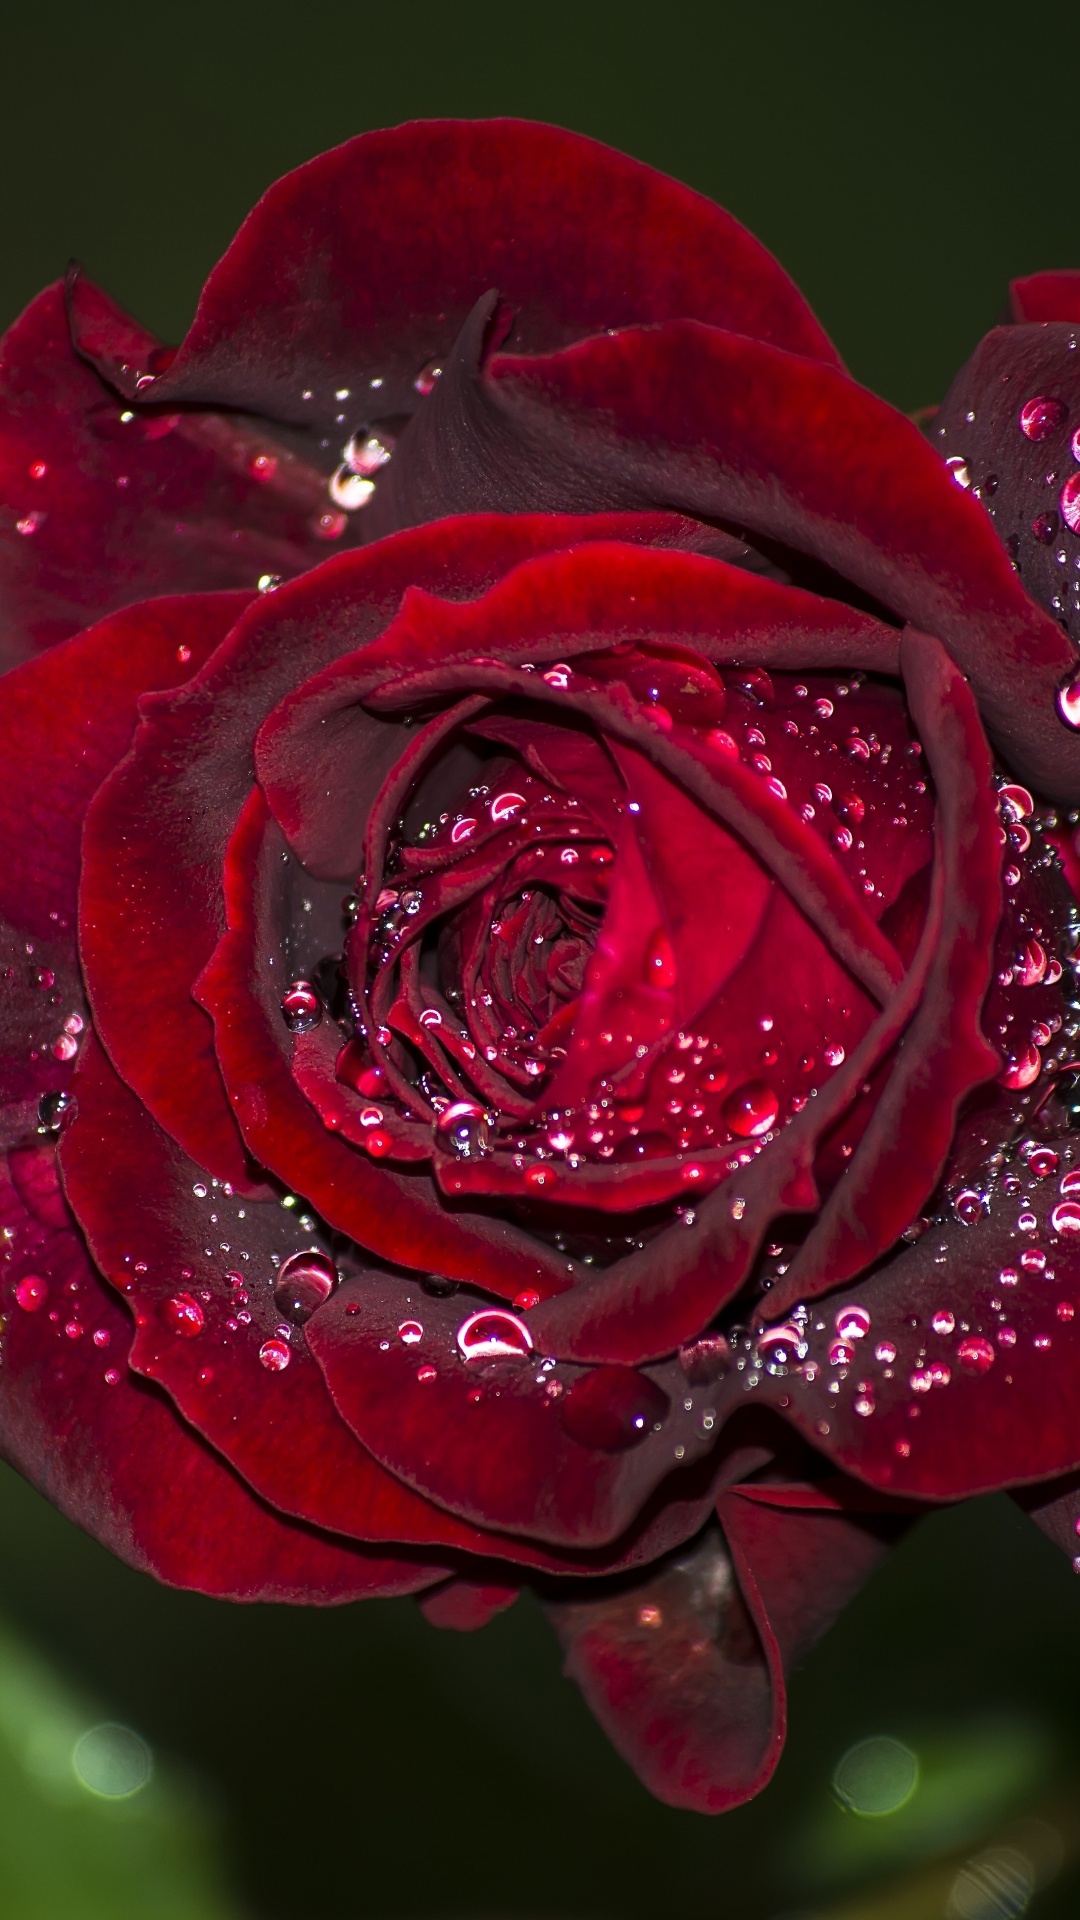 Red Rose in Bloom With Dew Drops. Wallpaper in 1080x1920 Resolution